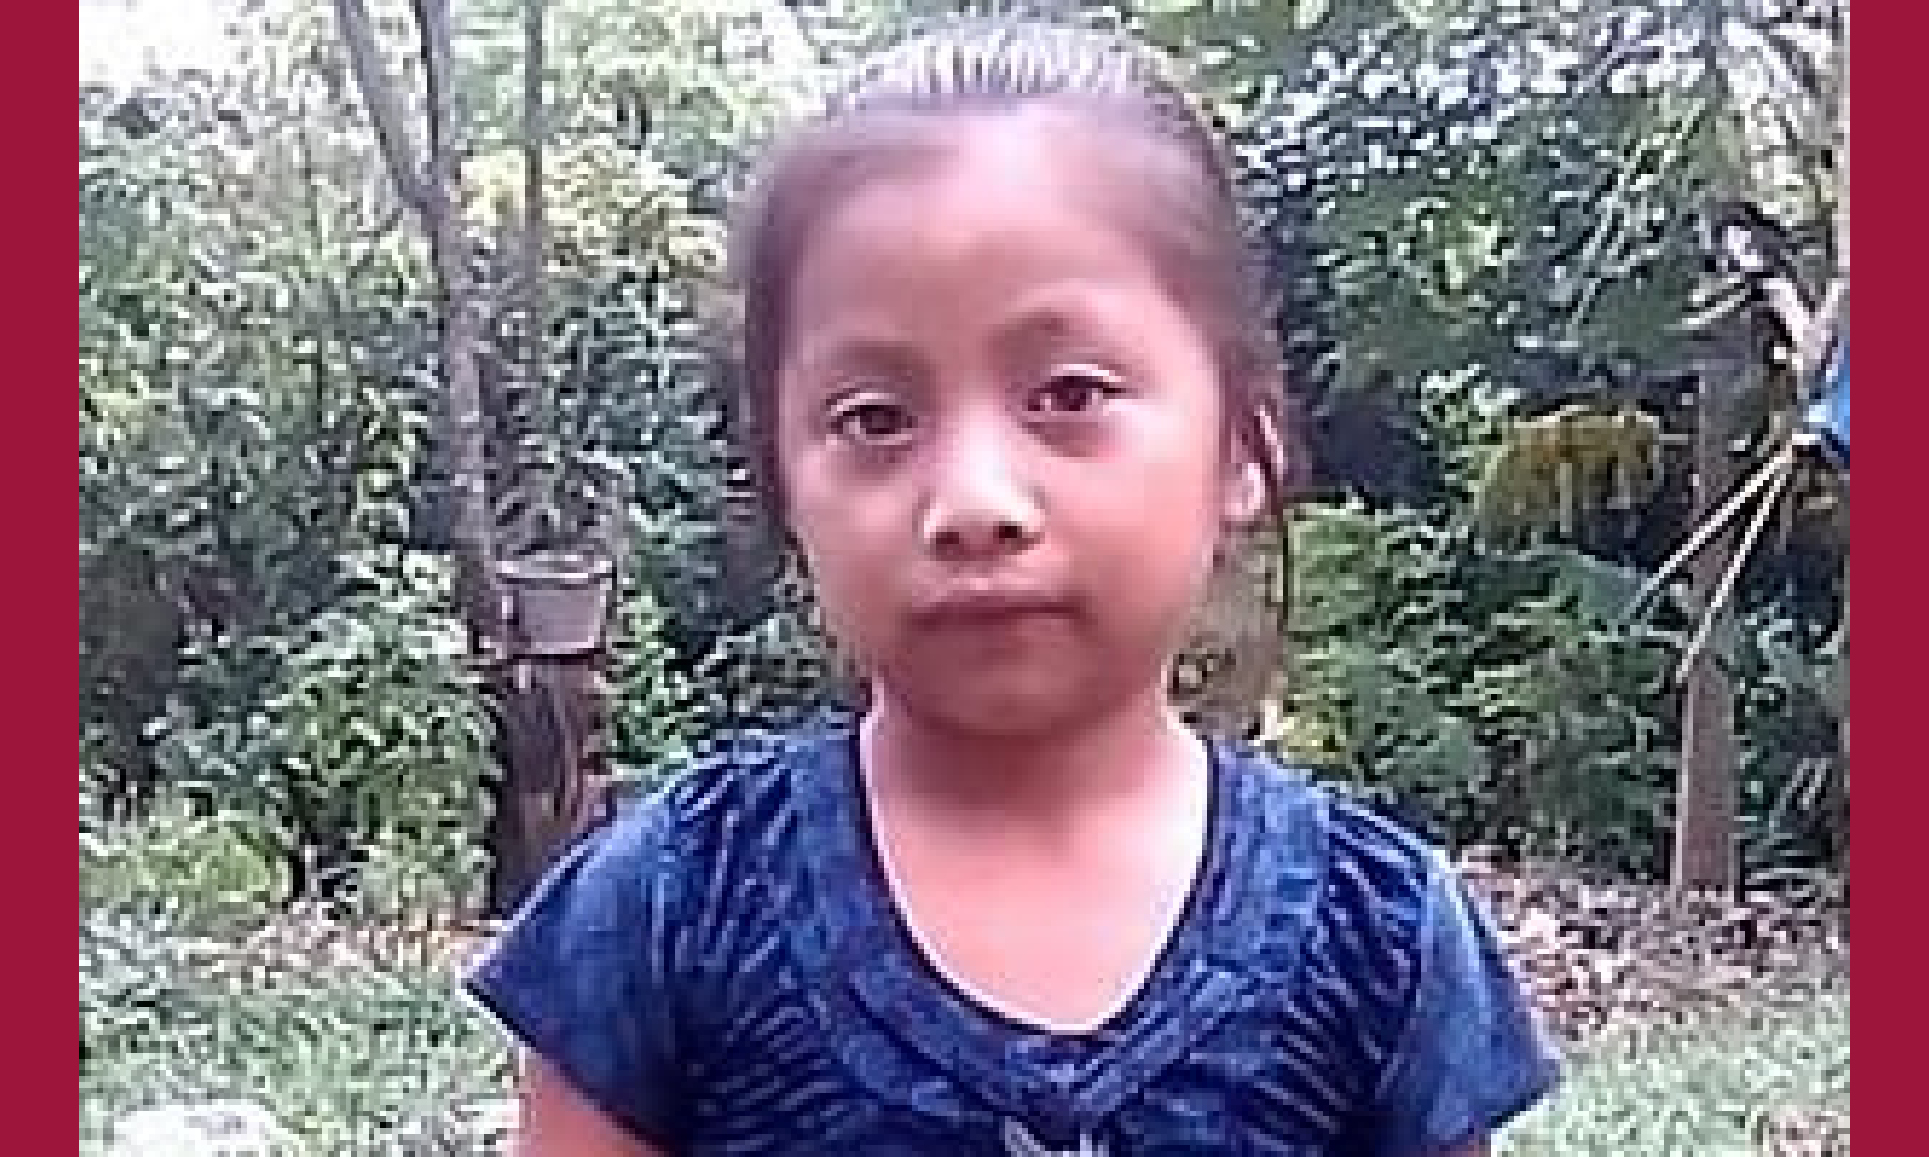 HELD BY BORDER PATROL CHILD DIES WITHOUT MEDICAL CARE